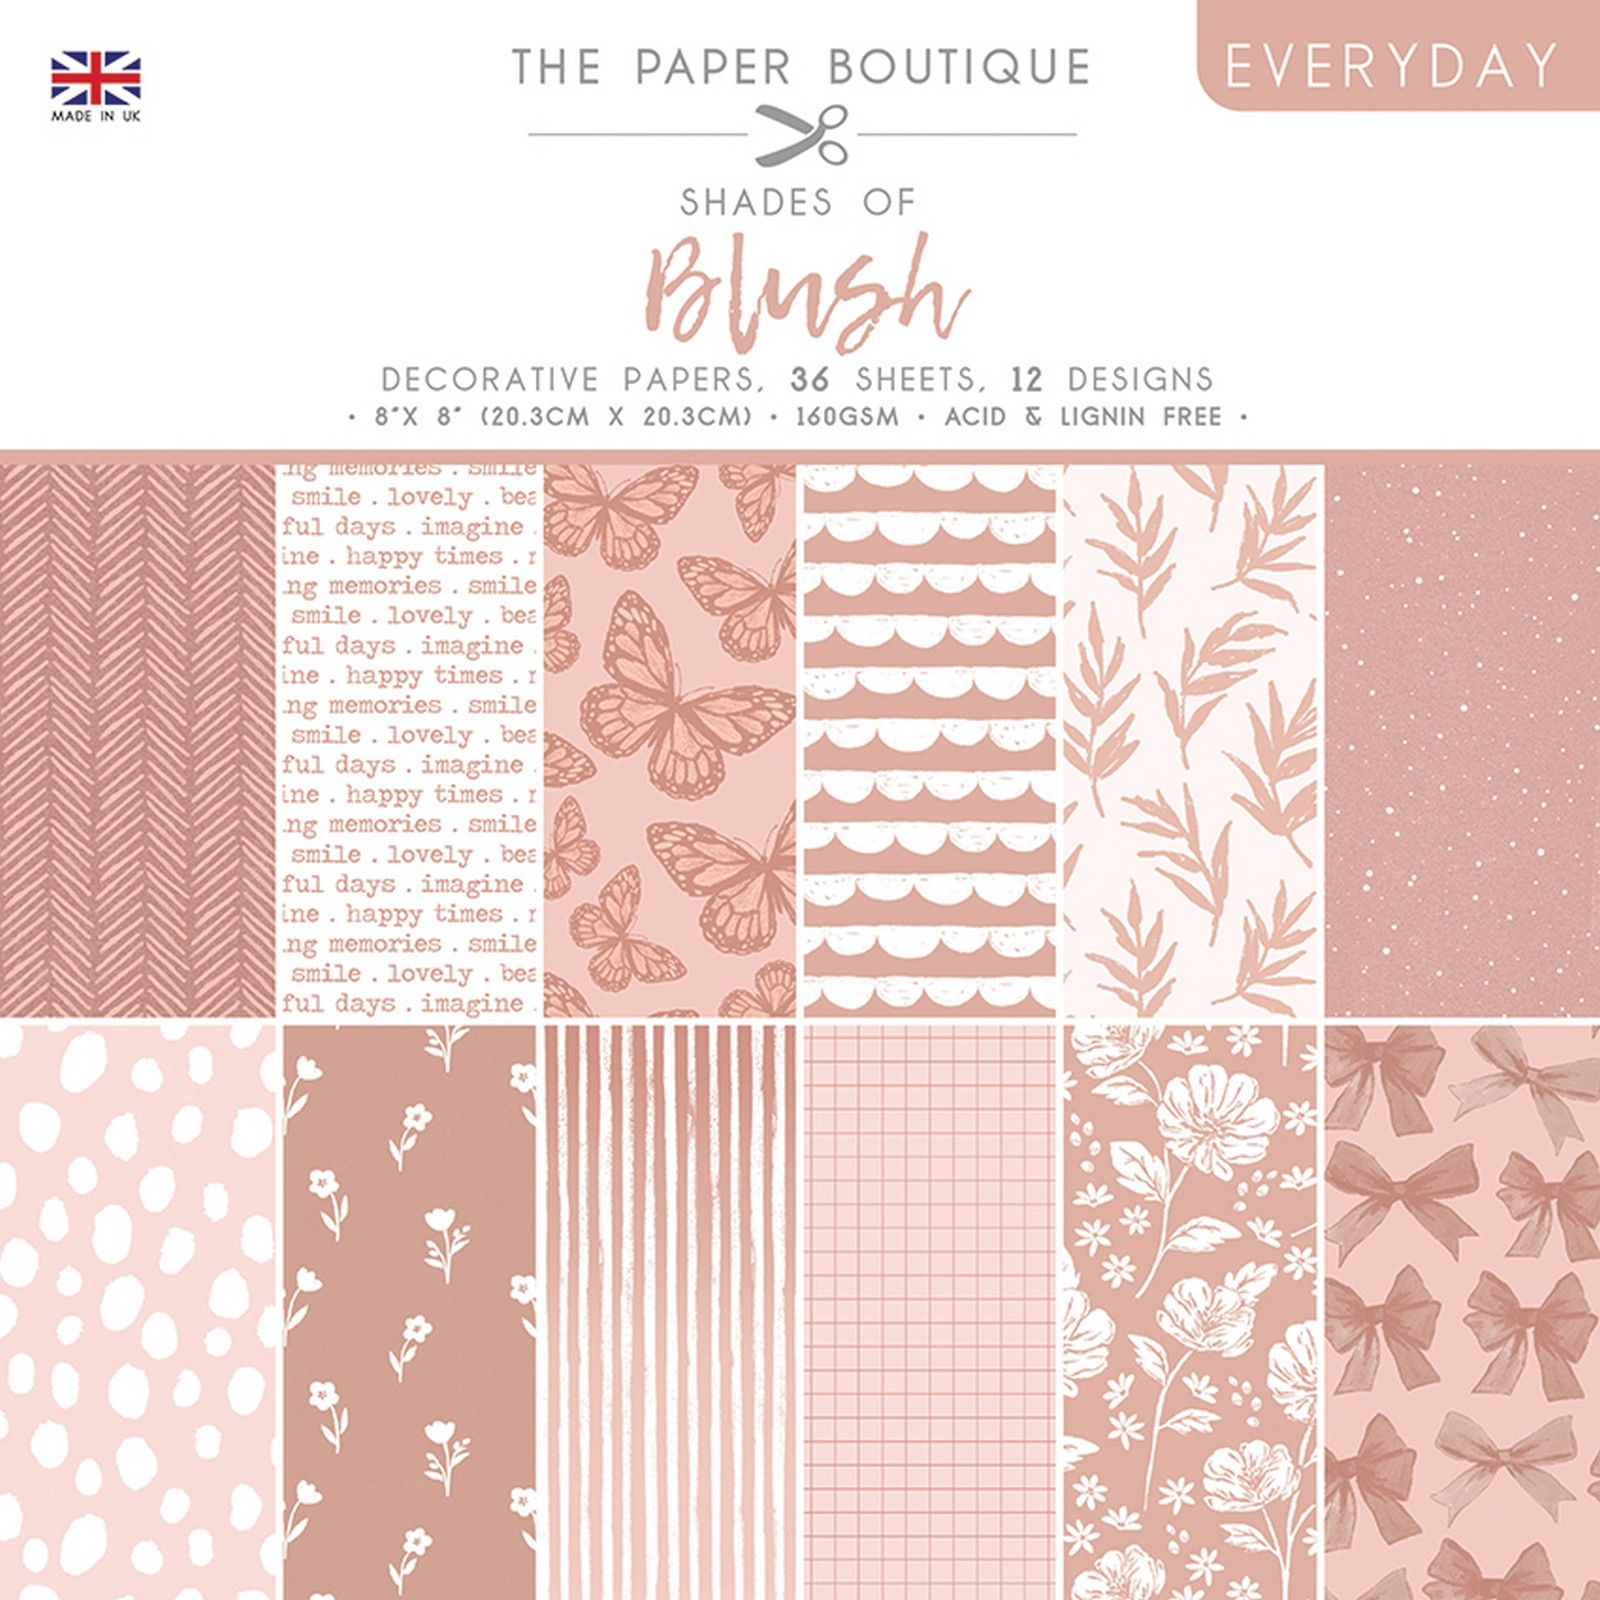 The Paper Boutique • Everyday shades of Blush decorative papers